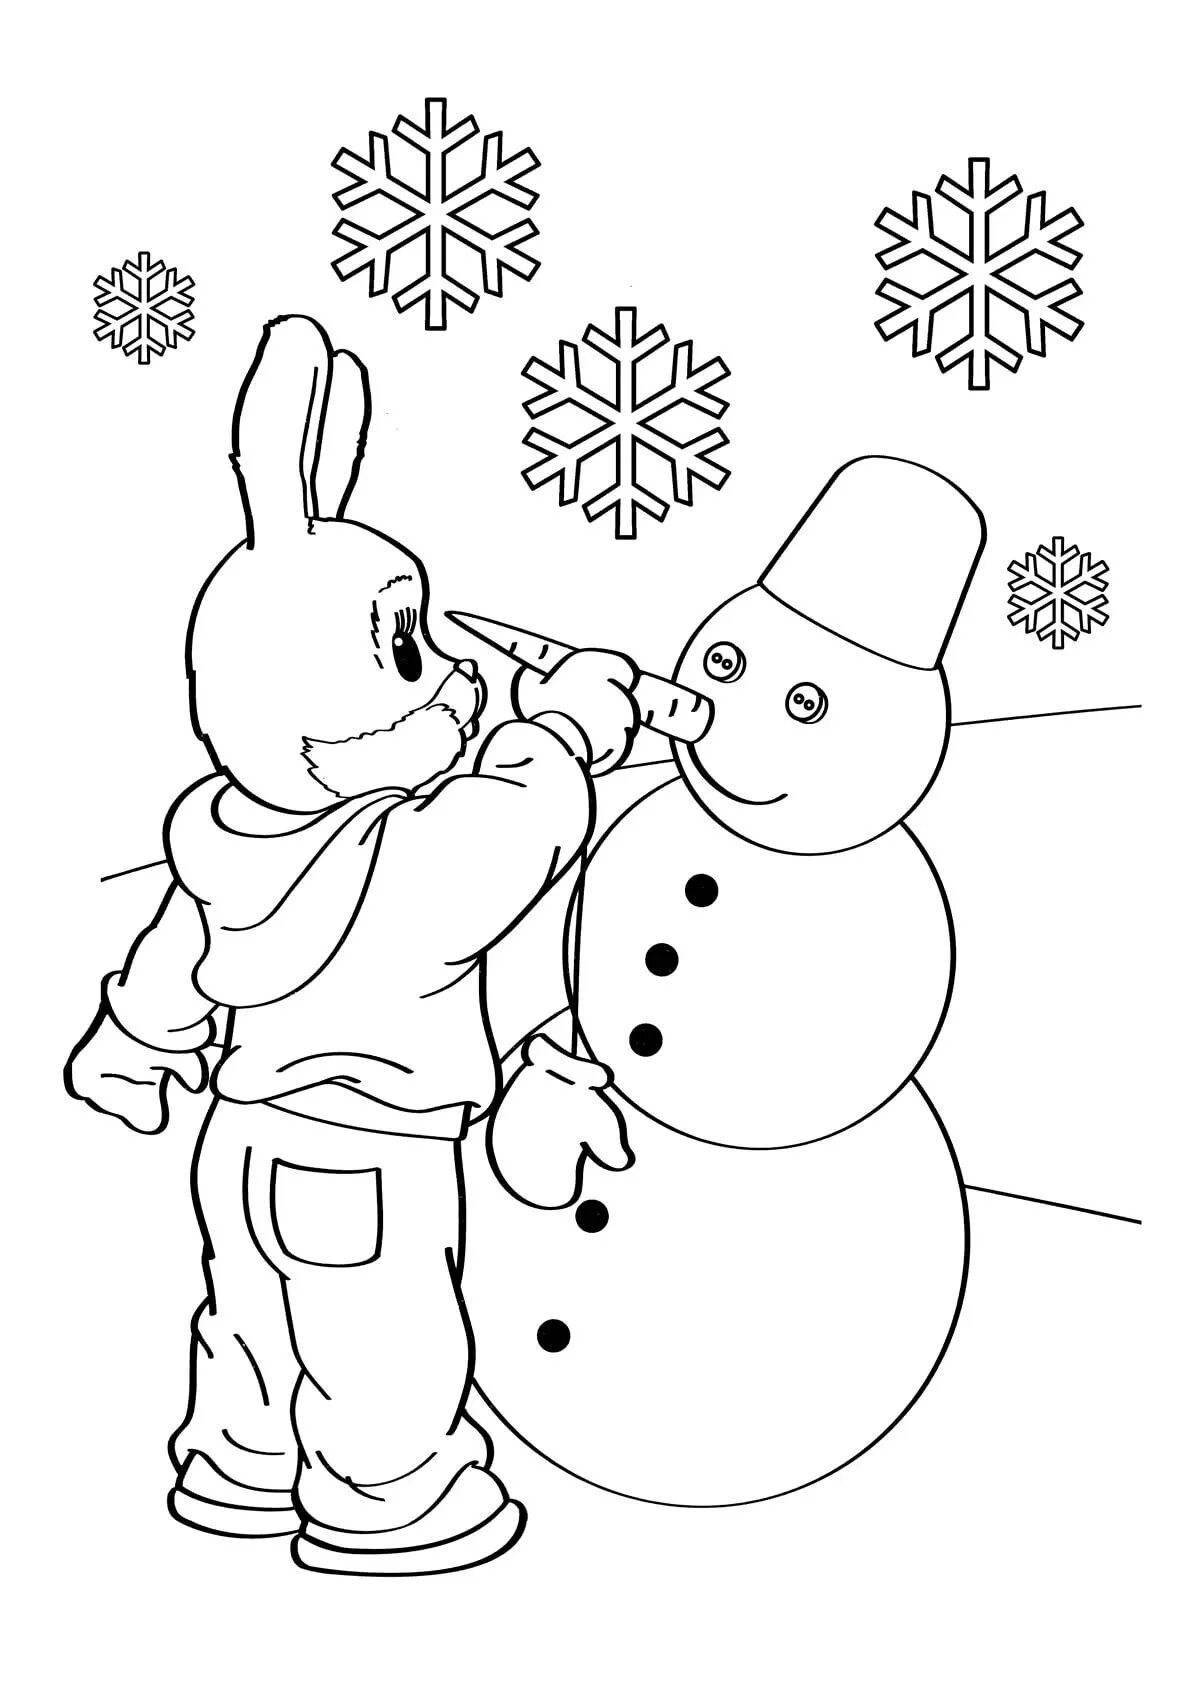 Luminous winter coloring book for children 2-3 years old